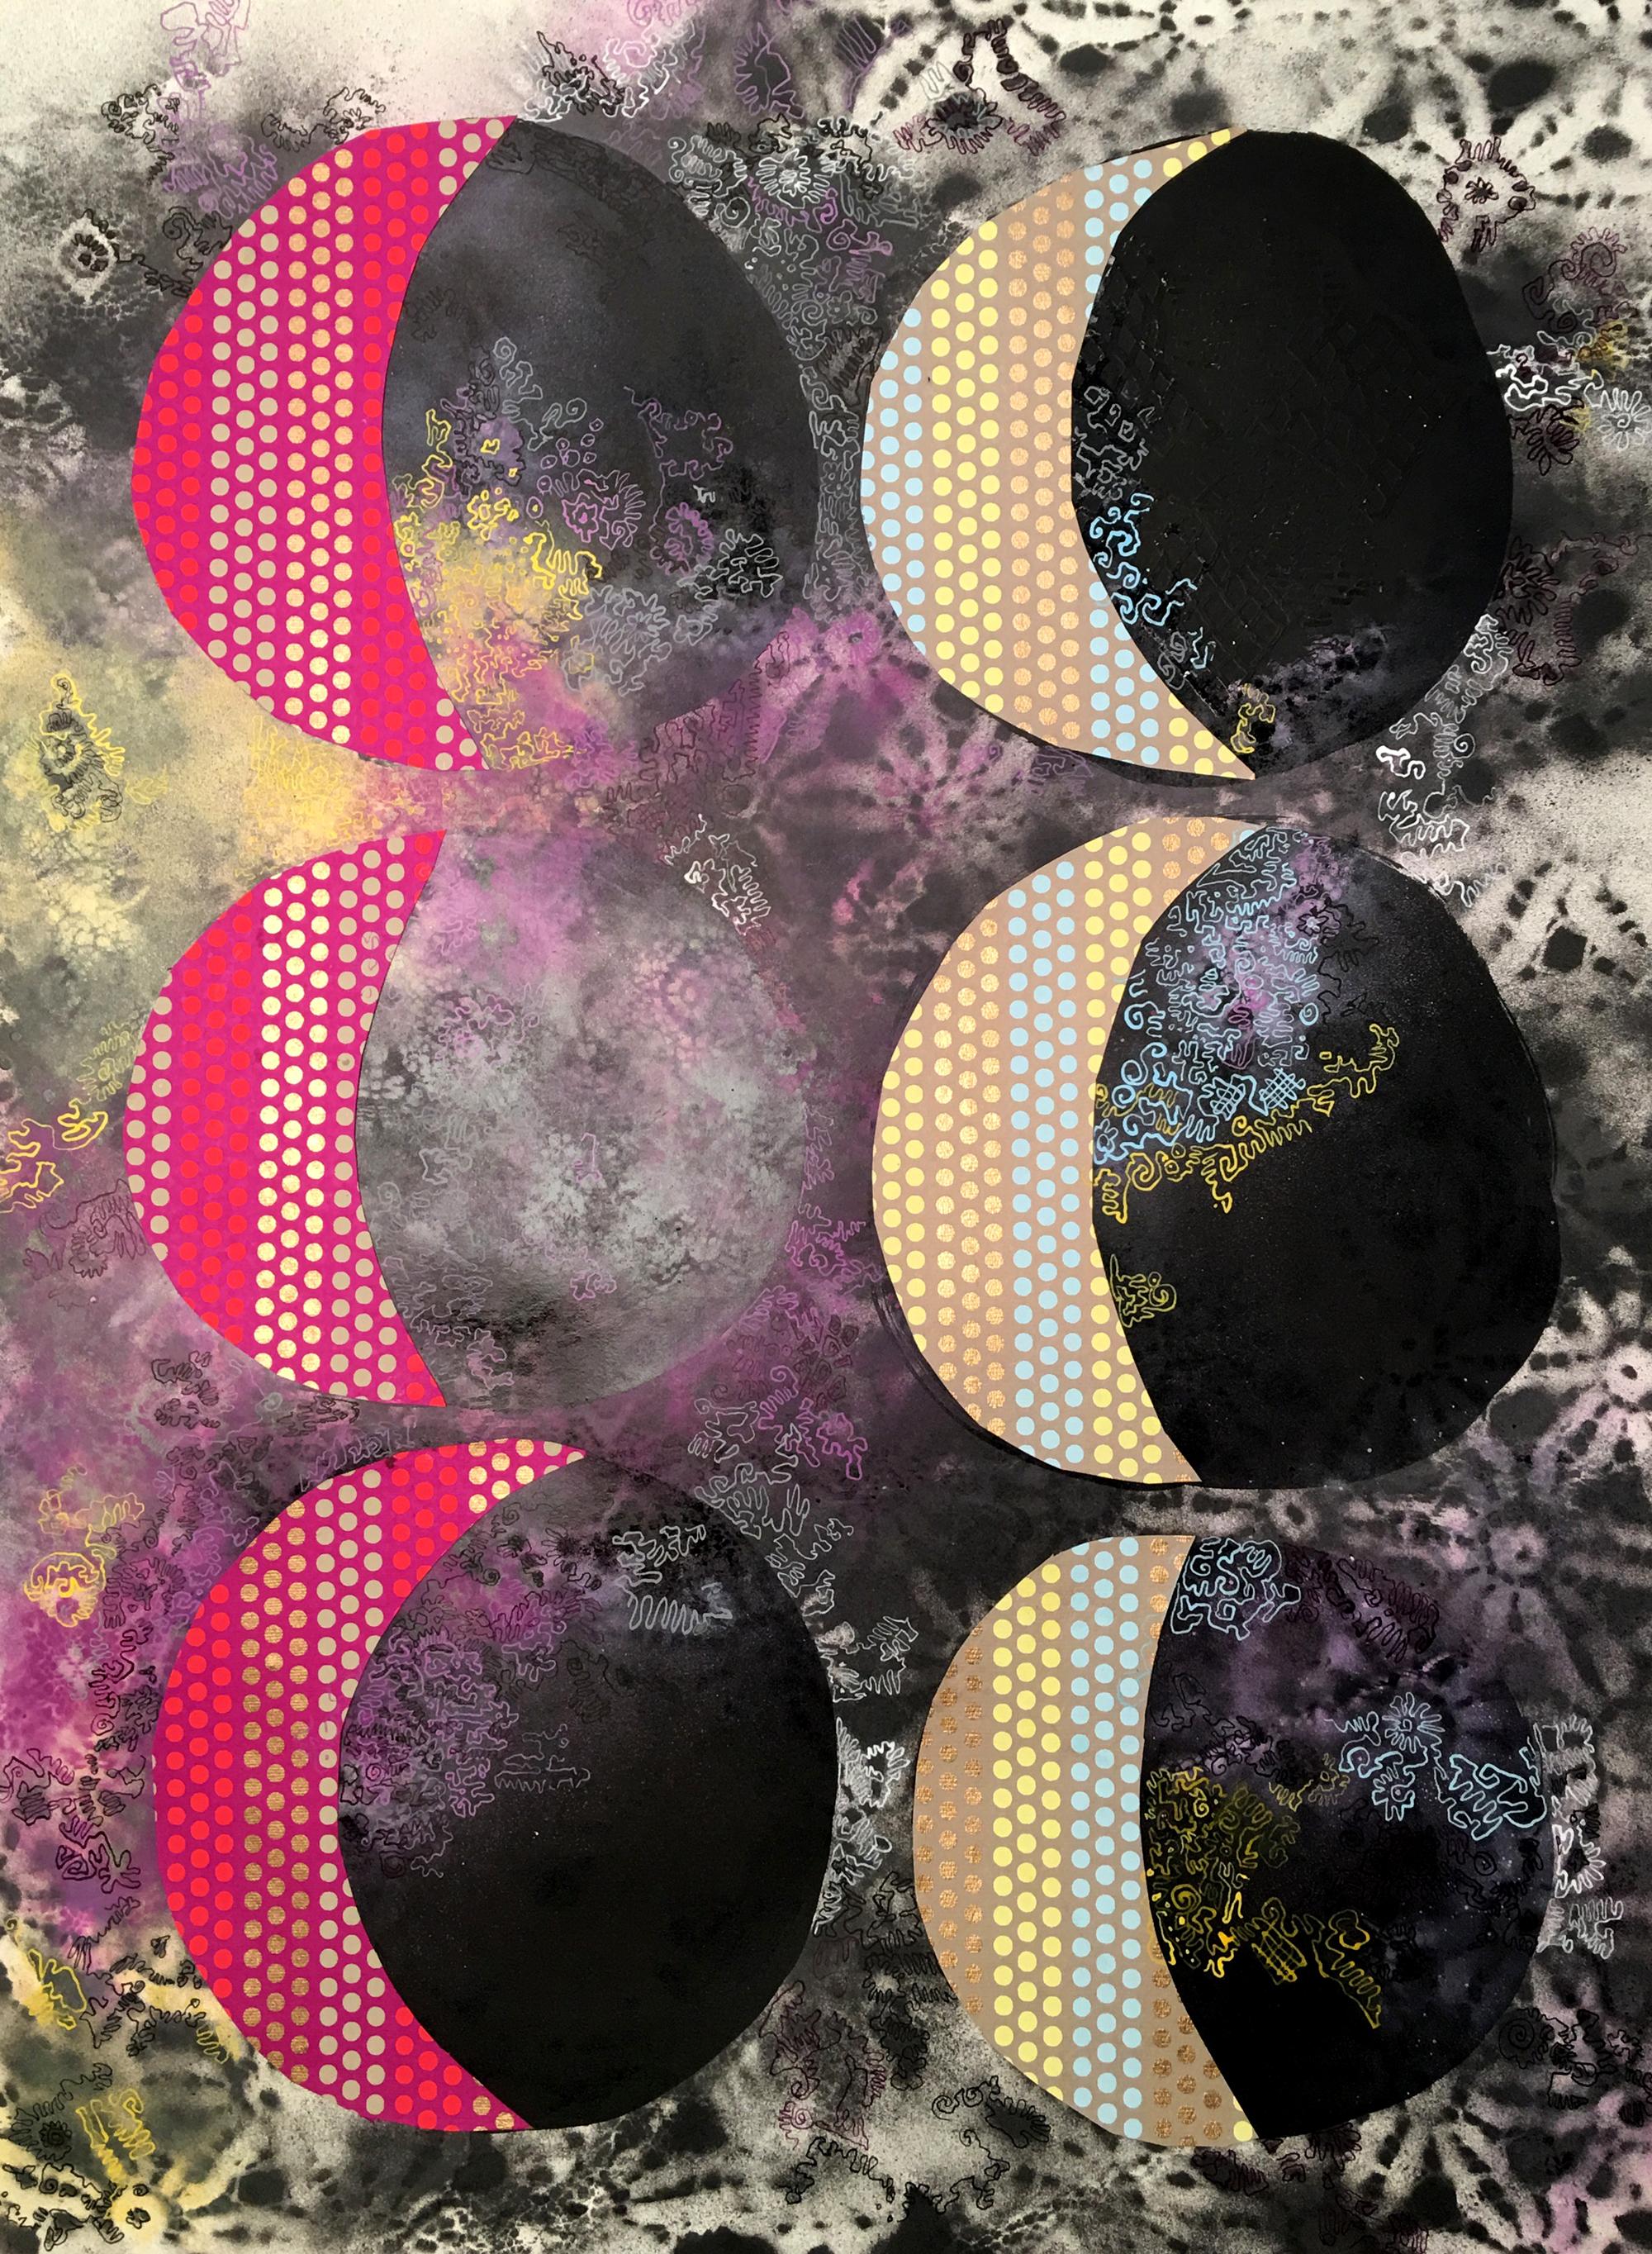 “Six Sigma”, eclipsing moons of pink and yellow float on a patterned black sky - Mixed Media Art by Rebecca Darlington